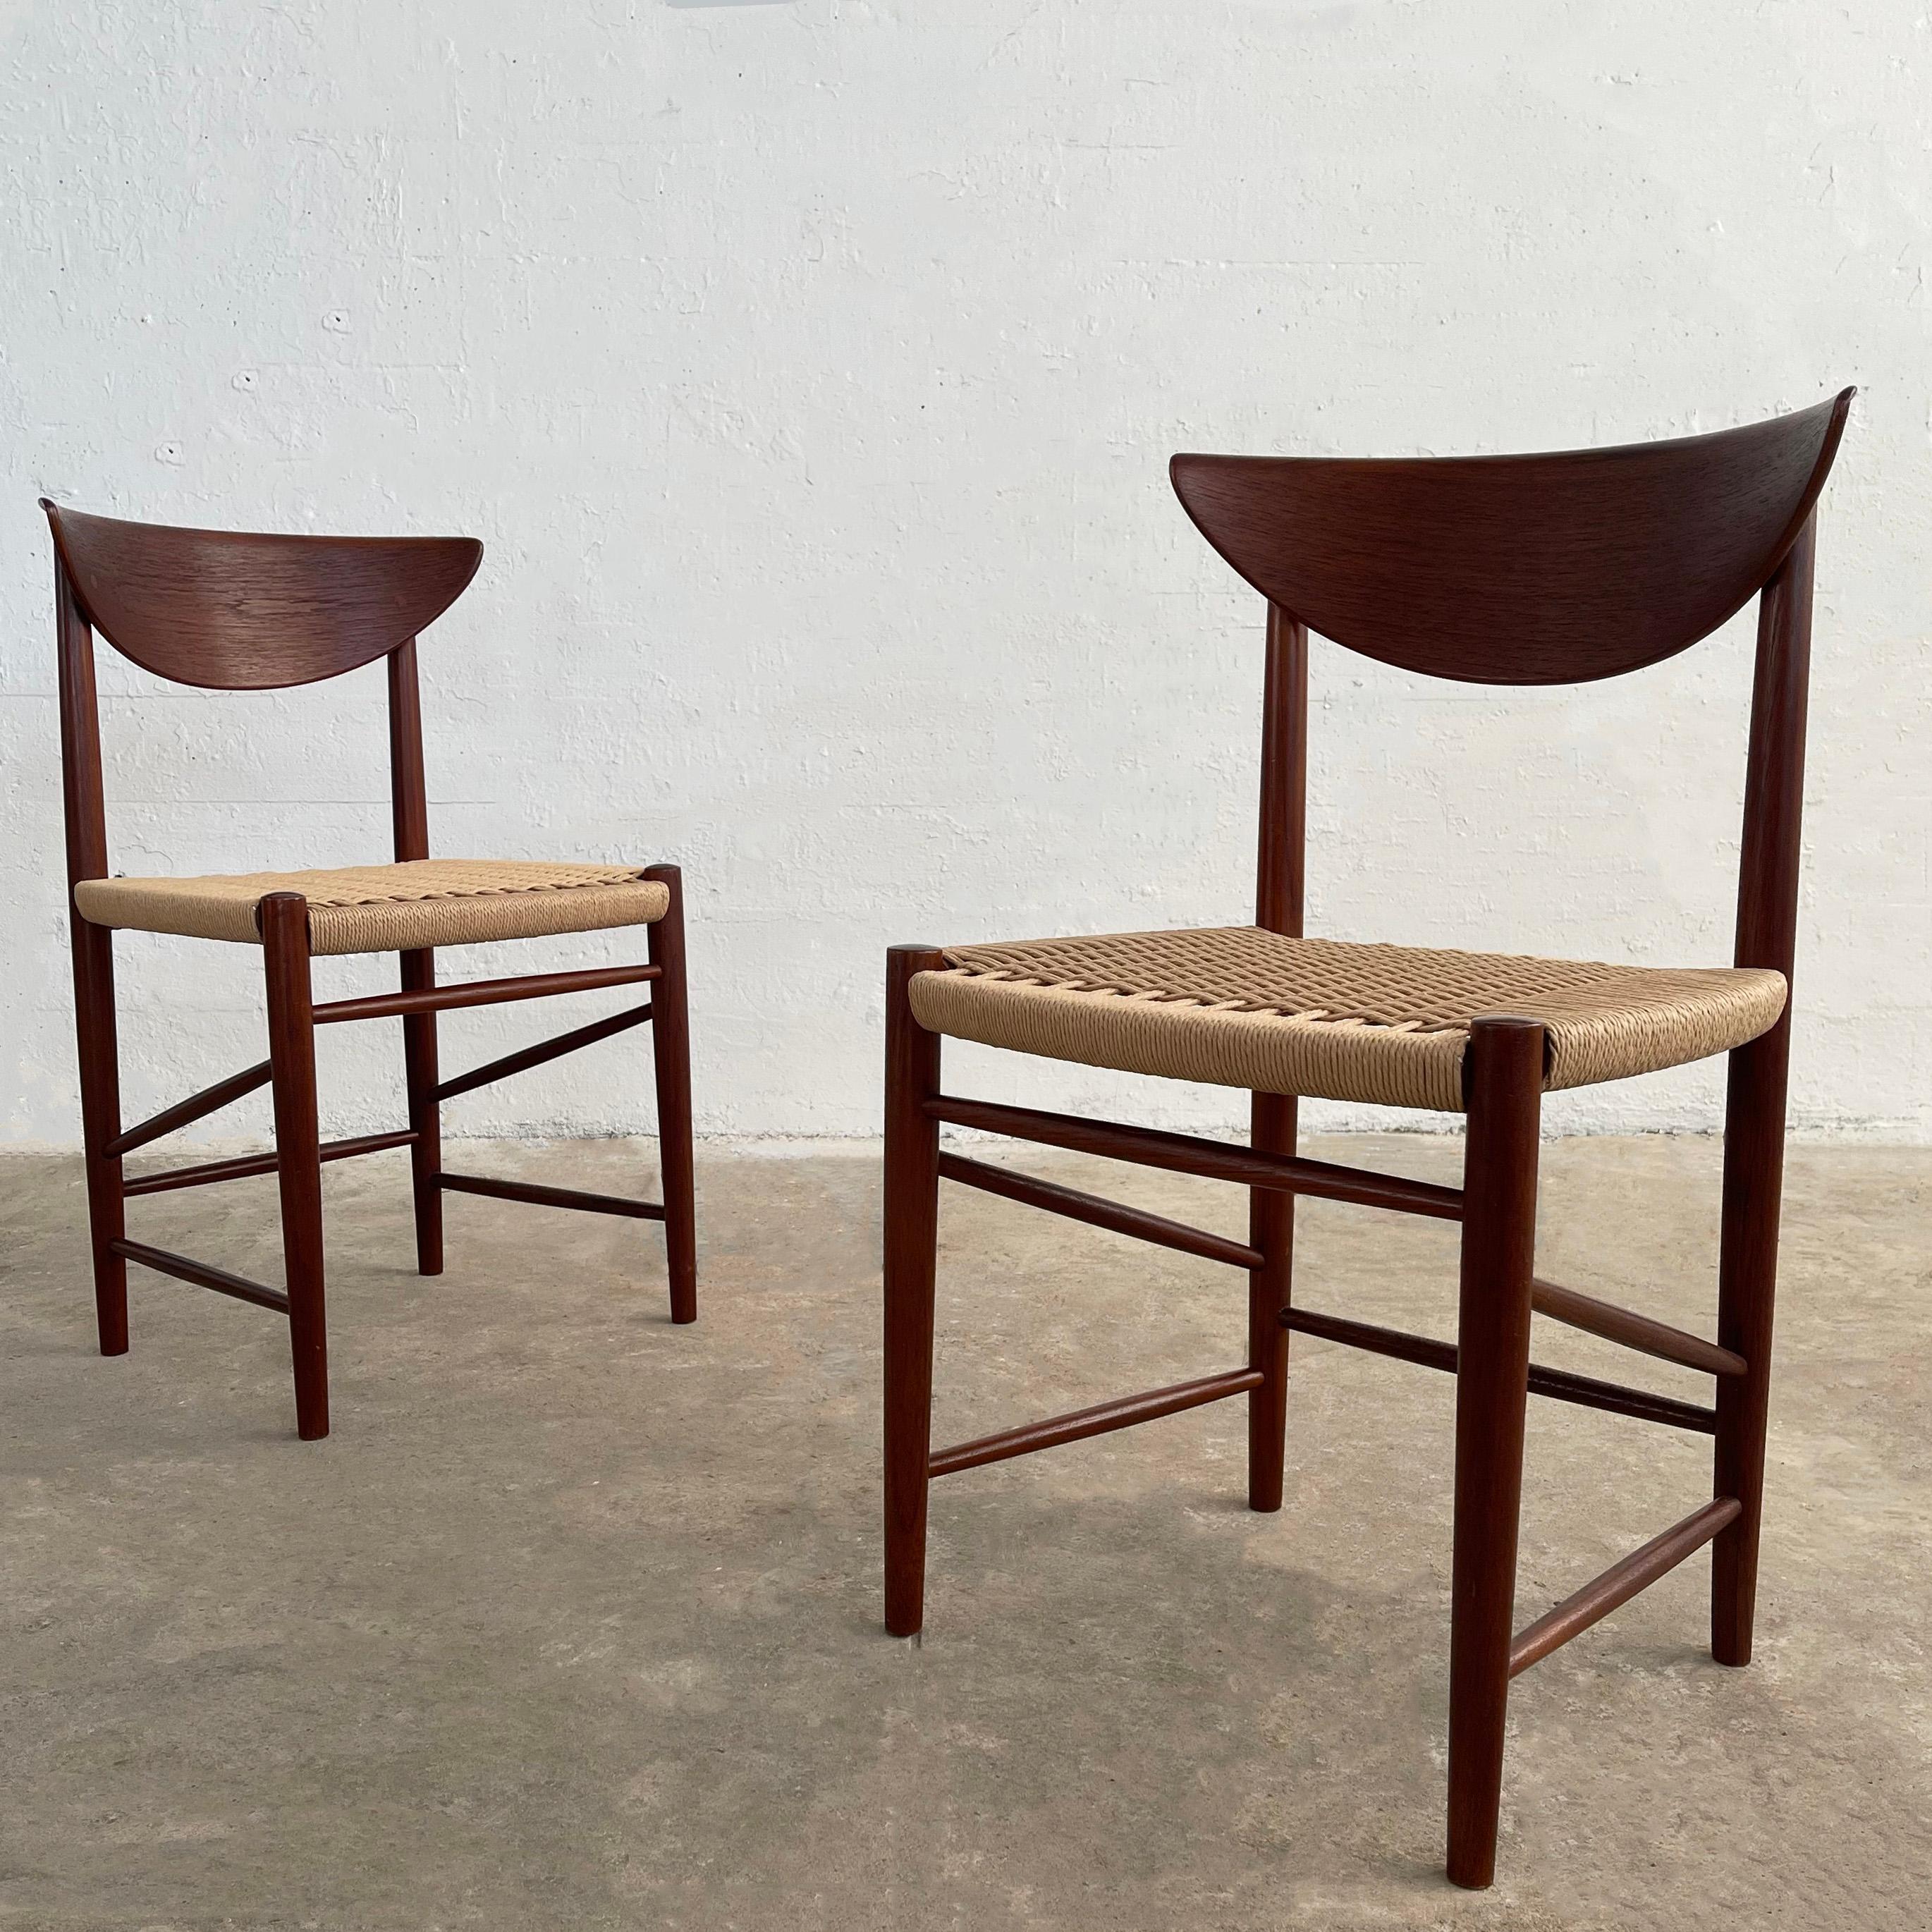 Pair of stunning, Scandinavian modern, dining, side chairs by Peter Hvidt and Orla Molgaard Nielsen for Soborg Mobelfabrik feature newly finished, dark teak frames with scoop backs to contrast the newly woven, light rope seats.